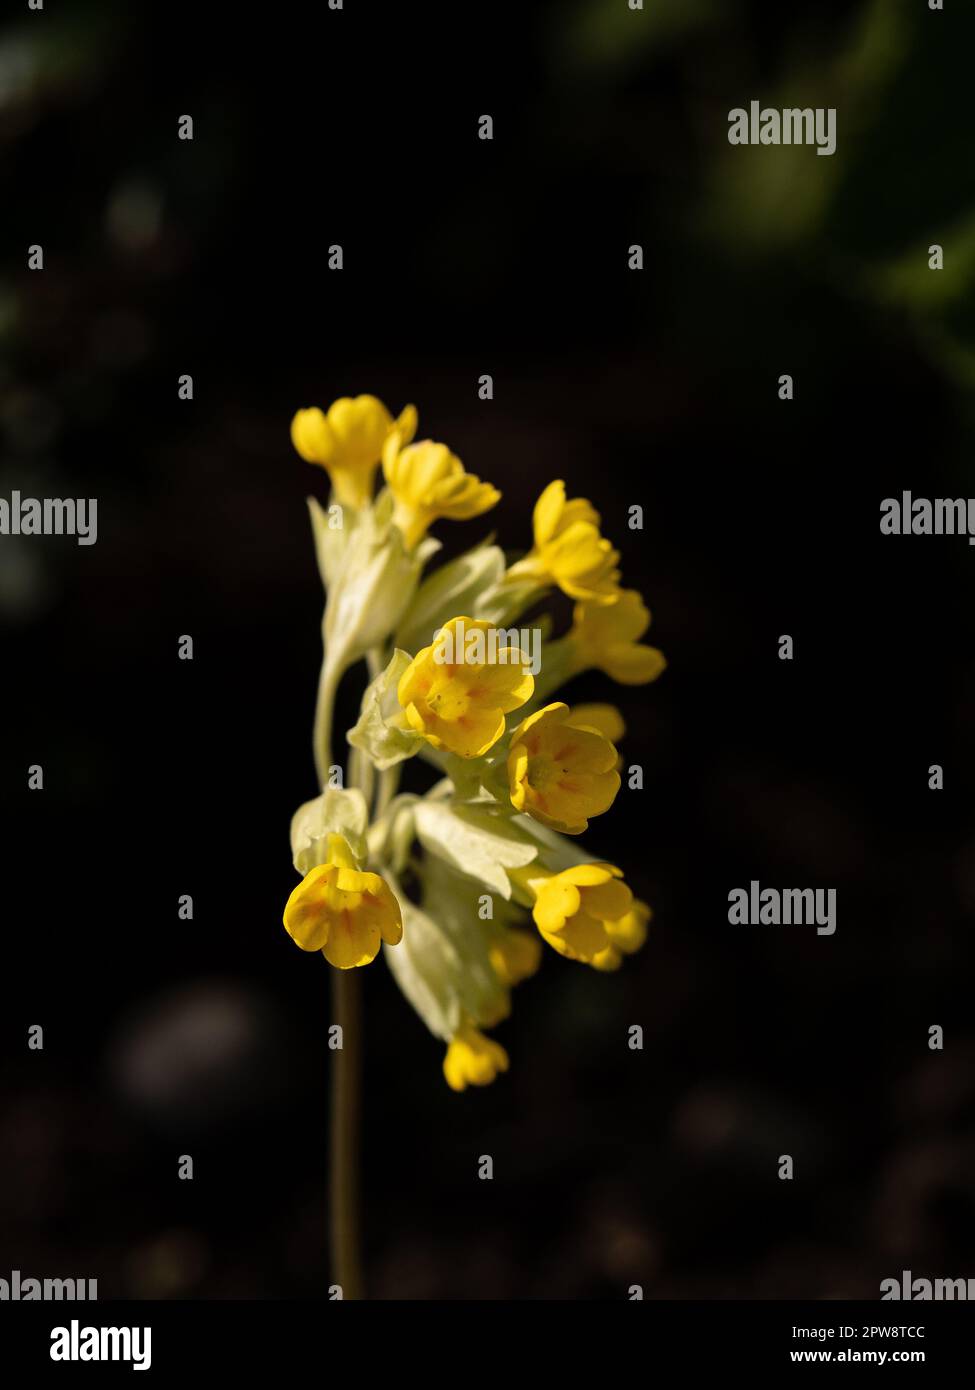 A close up of a single flower head of the cowslip Primula veris Stock Photo